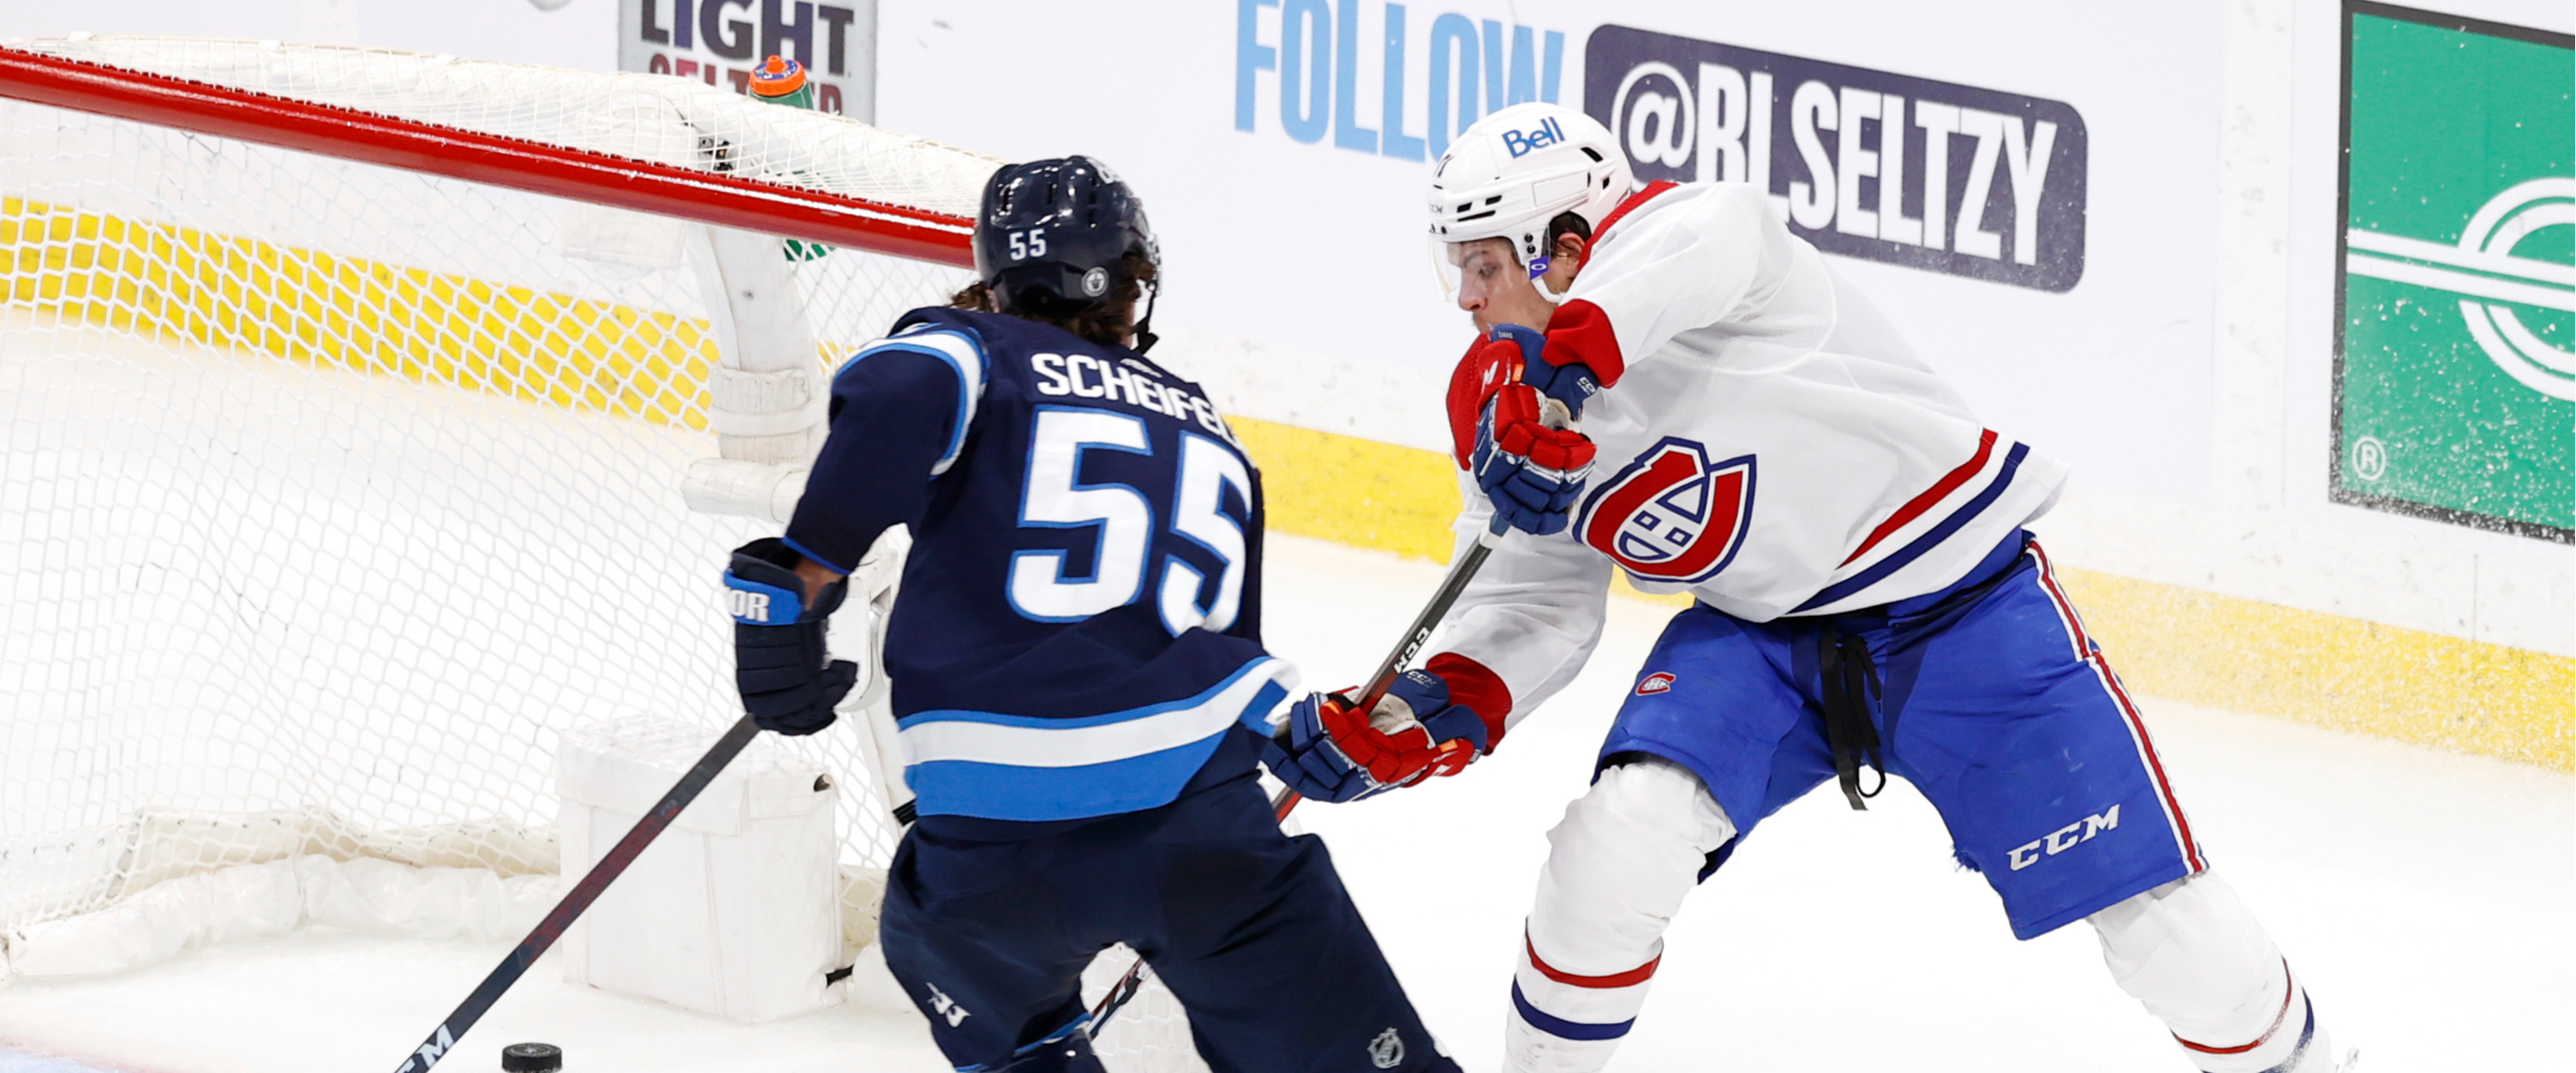 WATCH: Jets' center obliterates Canadiens' forward in dirty play